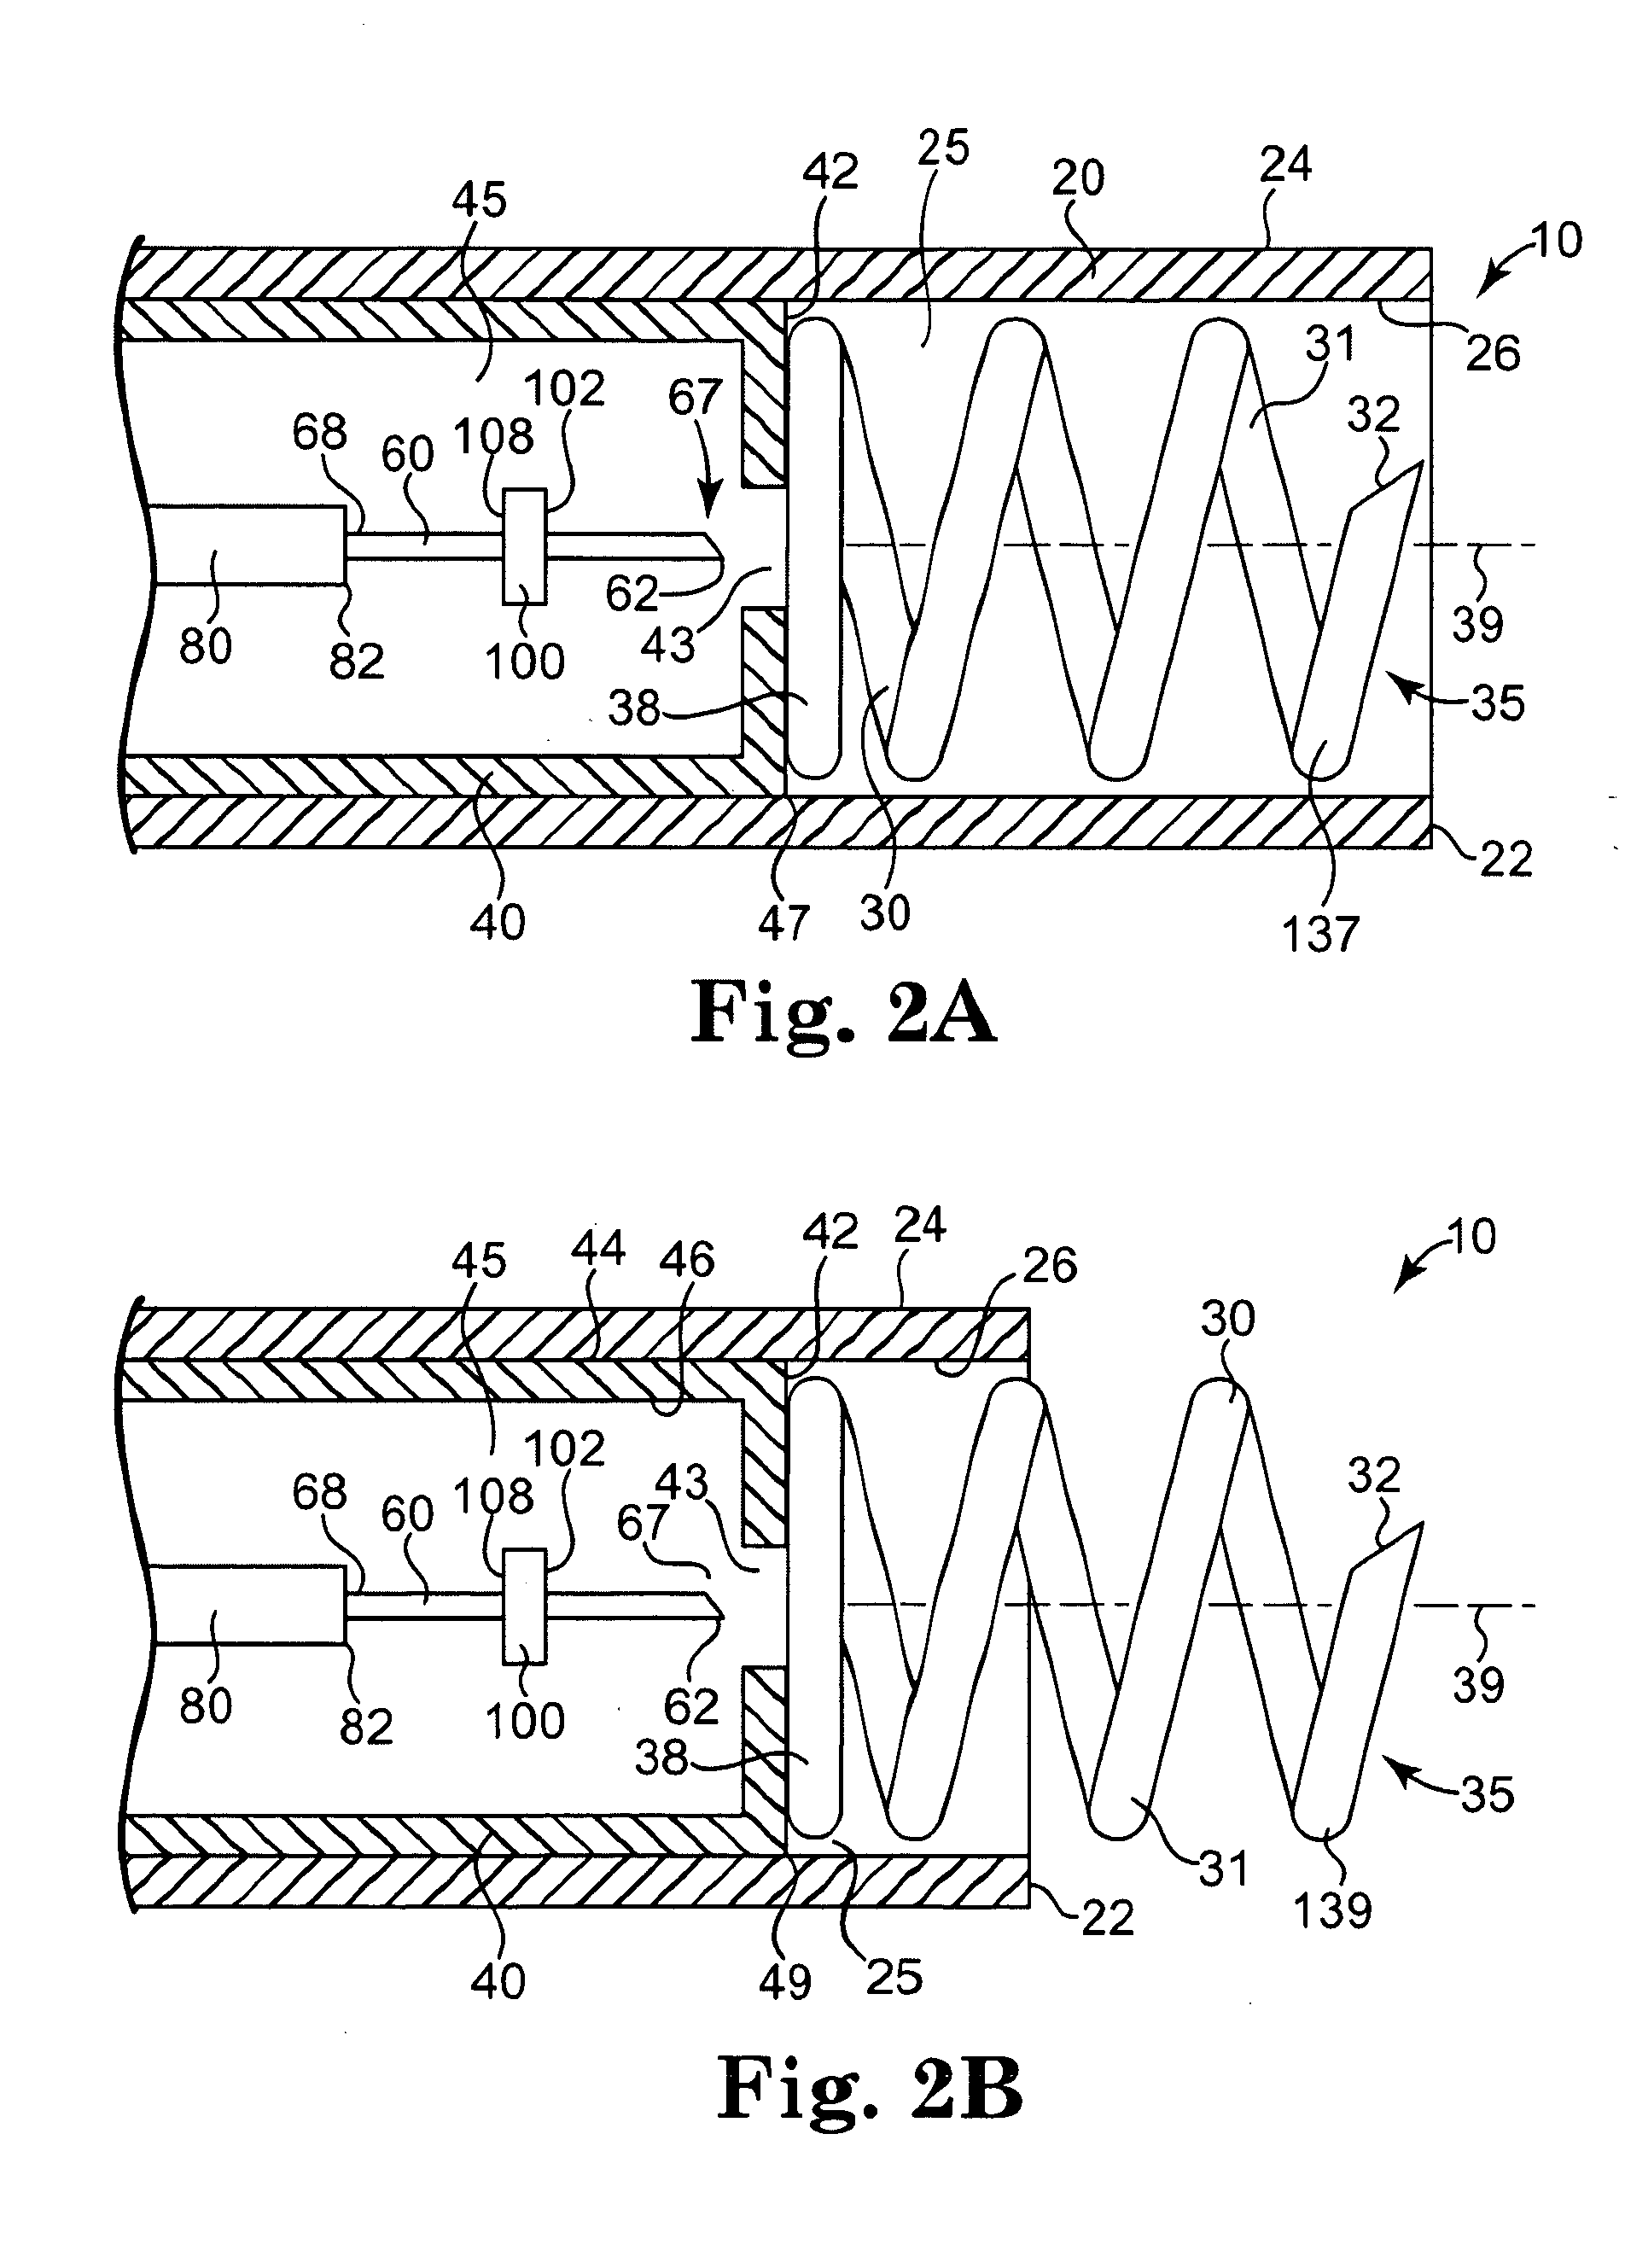 Apparatus and method for controlled depth of injection into myocardial tissue